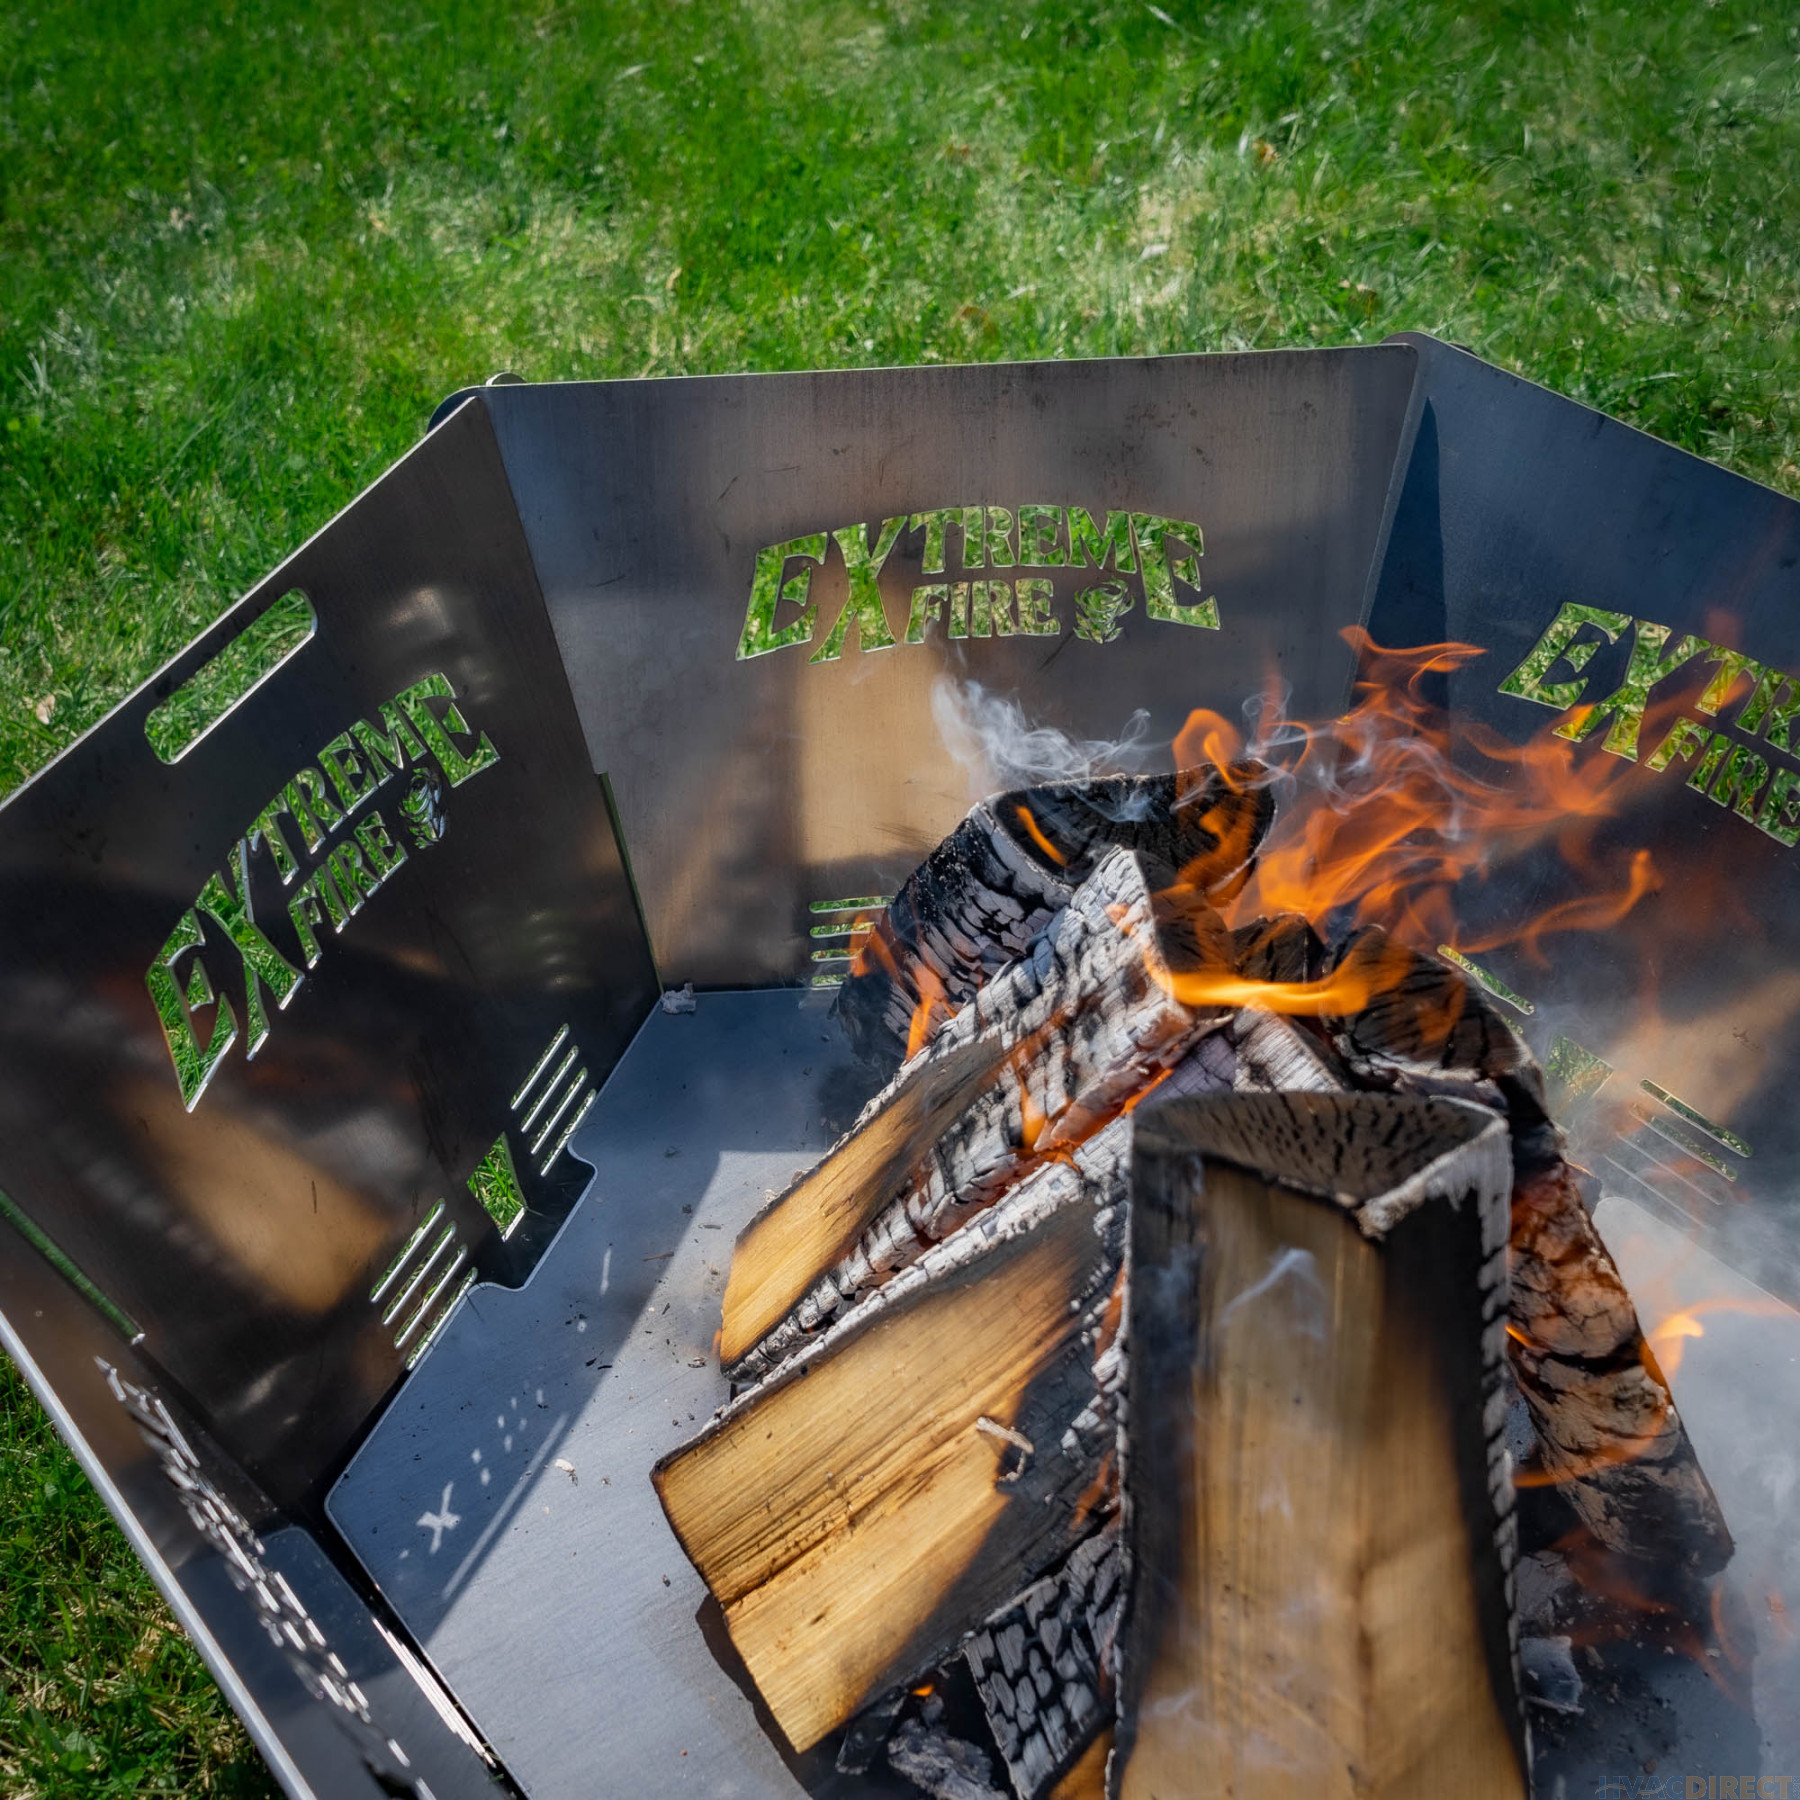 Extreme Fire Big 6 Fire Pit - 50001